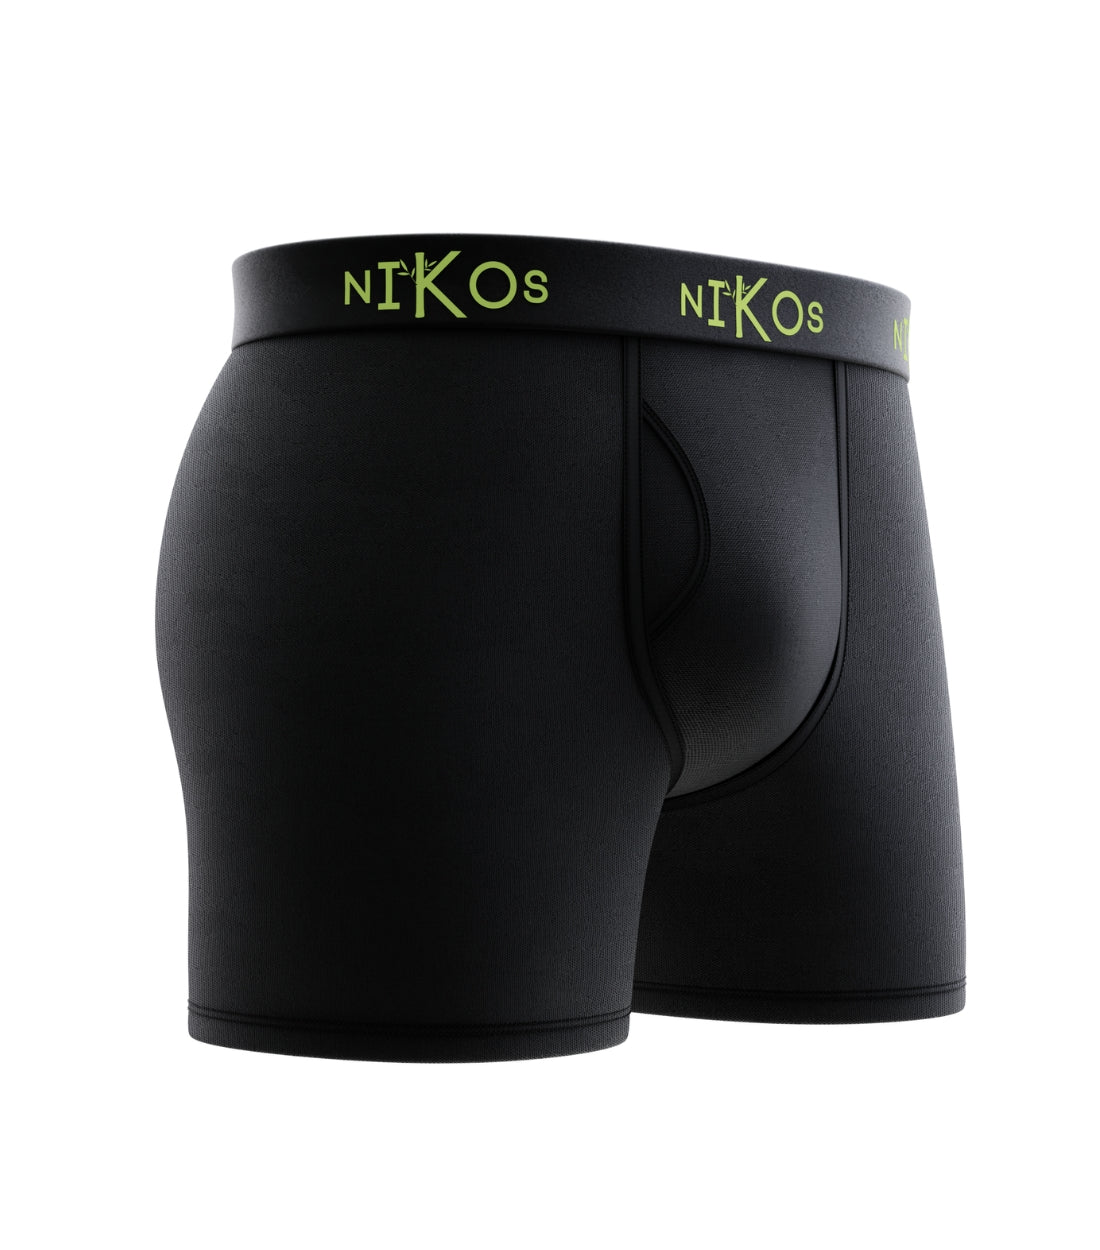 Pack of 5 Nikos Bamboo Boxer Briefs in Black